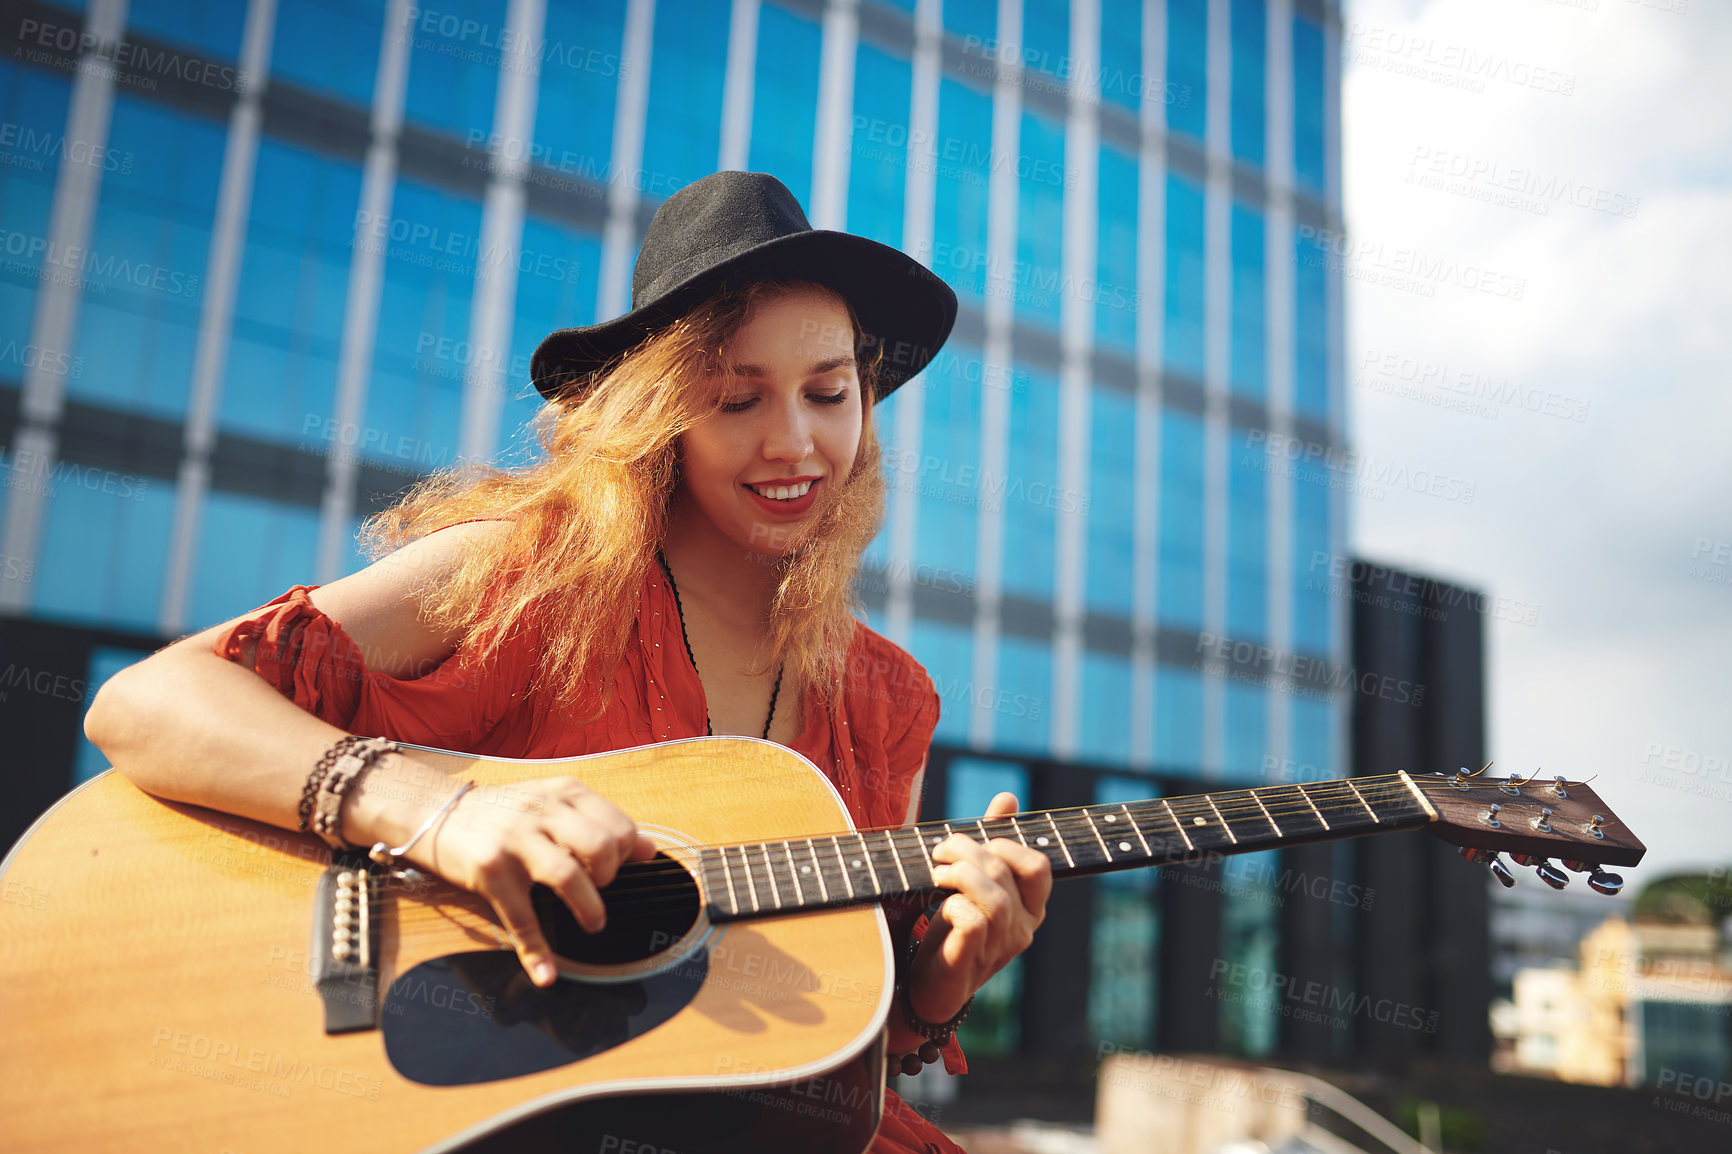 Buy stock photo Shot of a beautiful young woman out in the city with her guitar